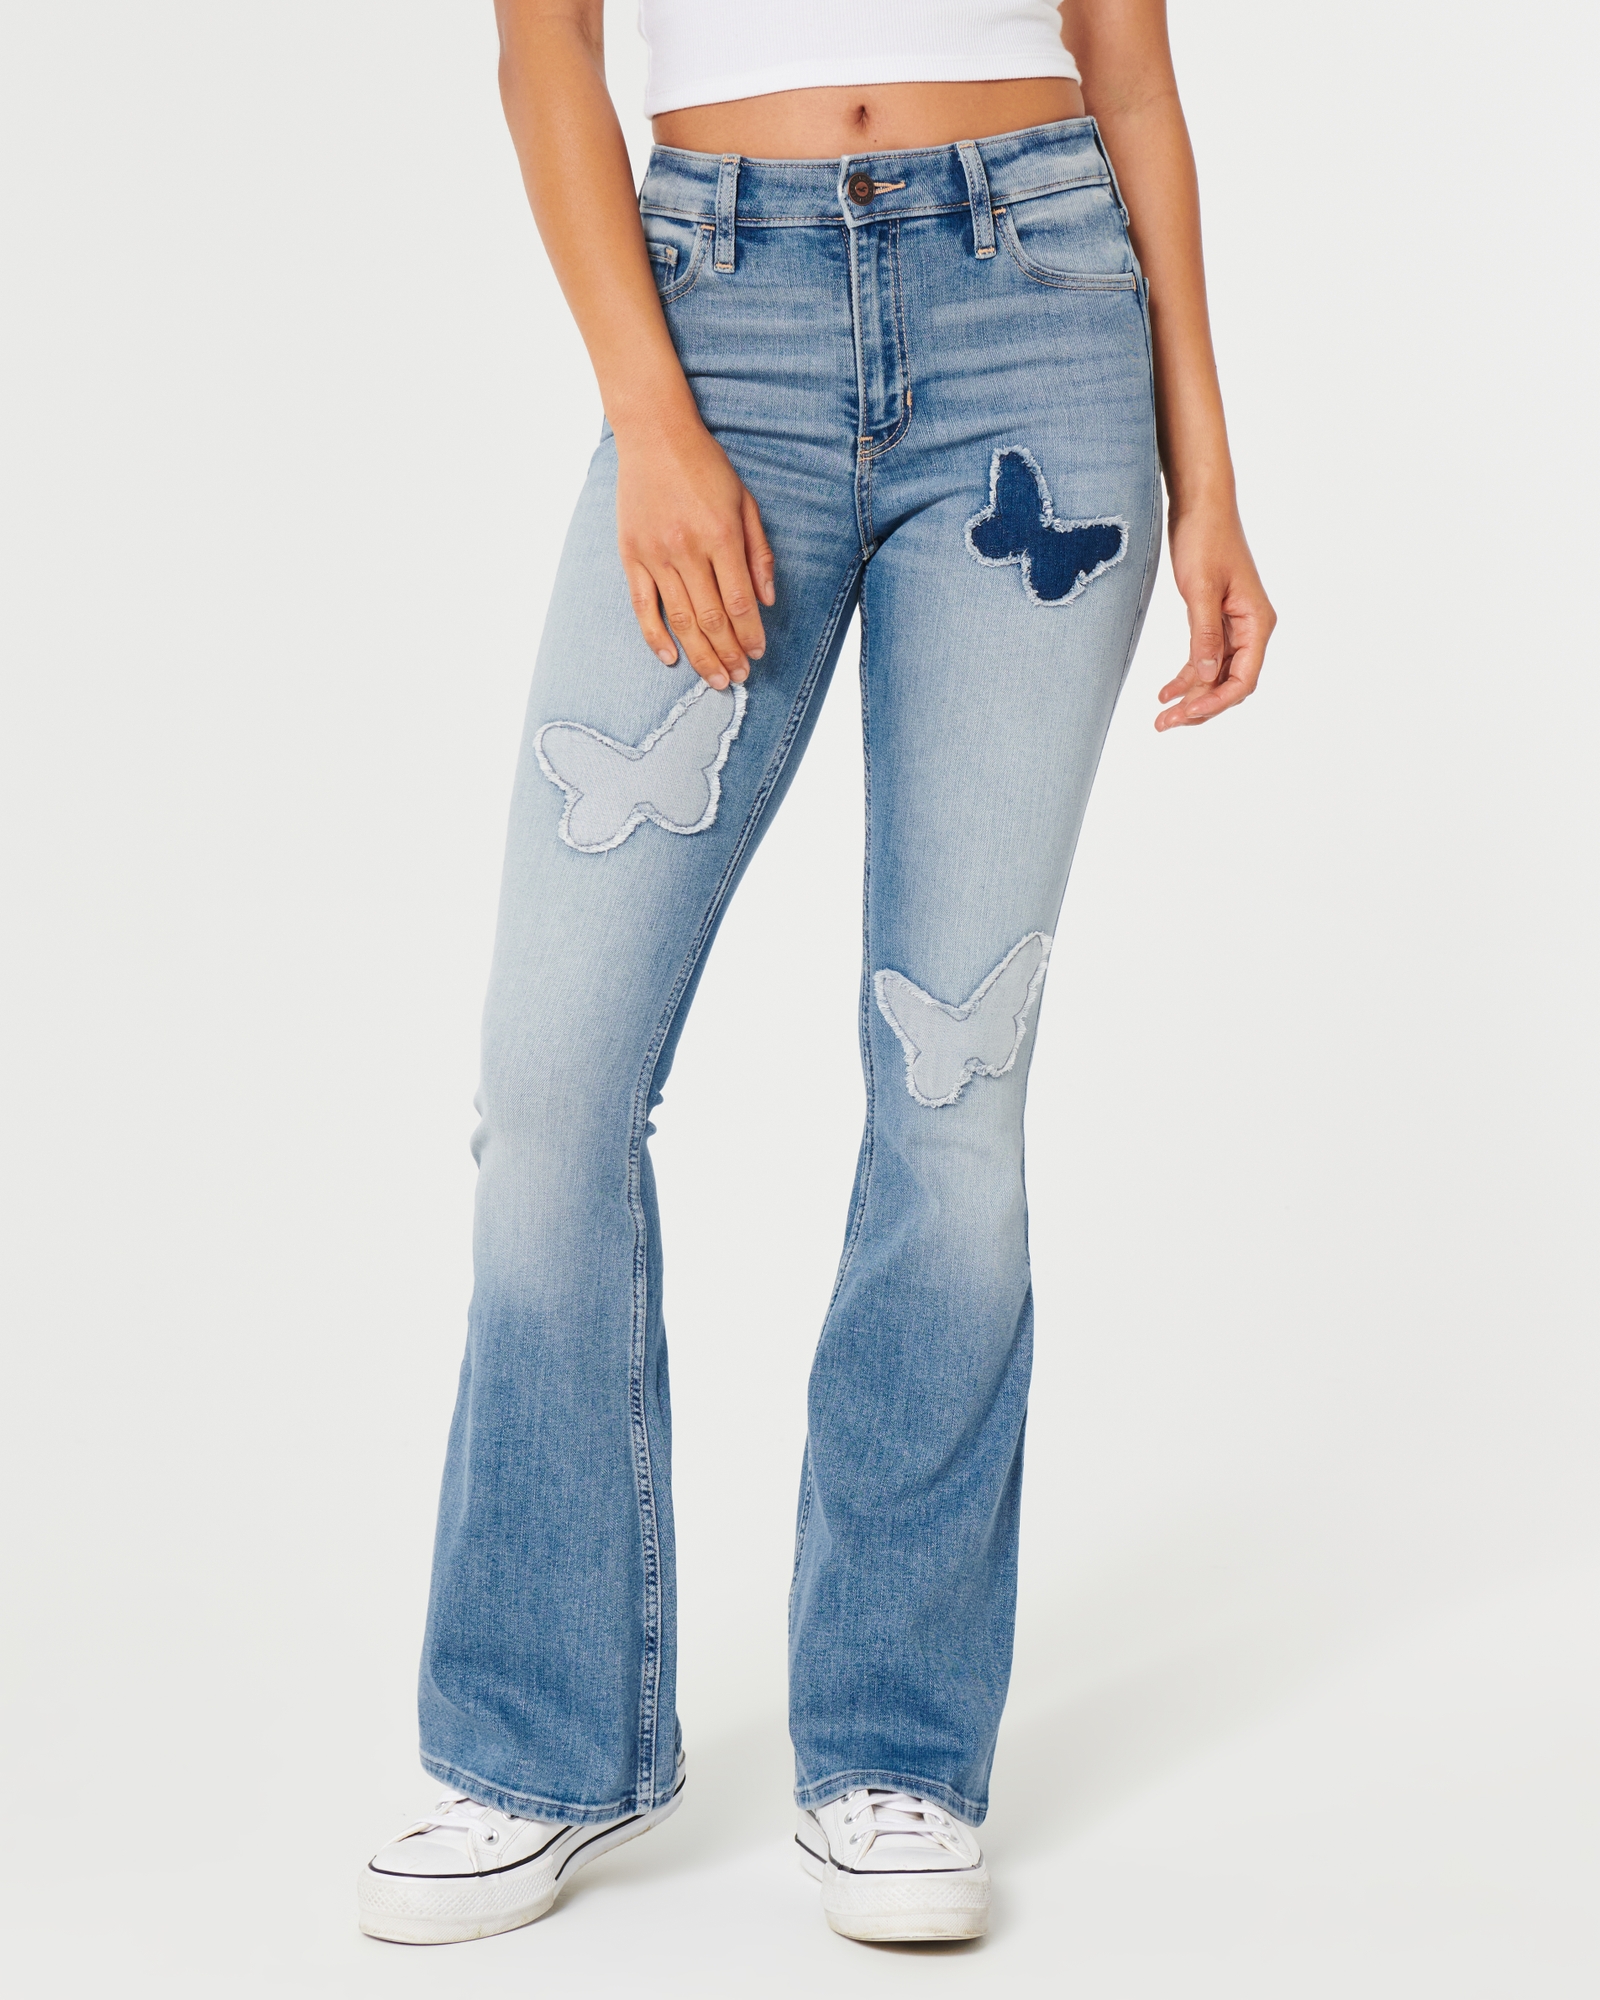 high waist flare jeans! Hollister jeans! Flares have